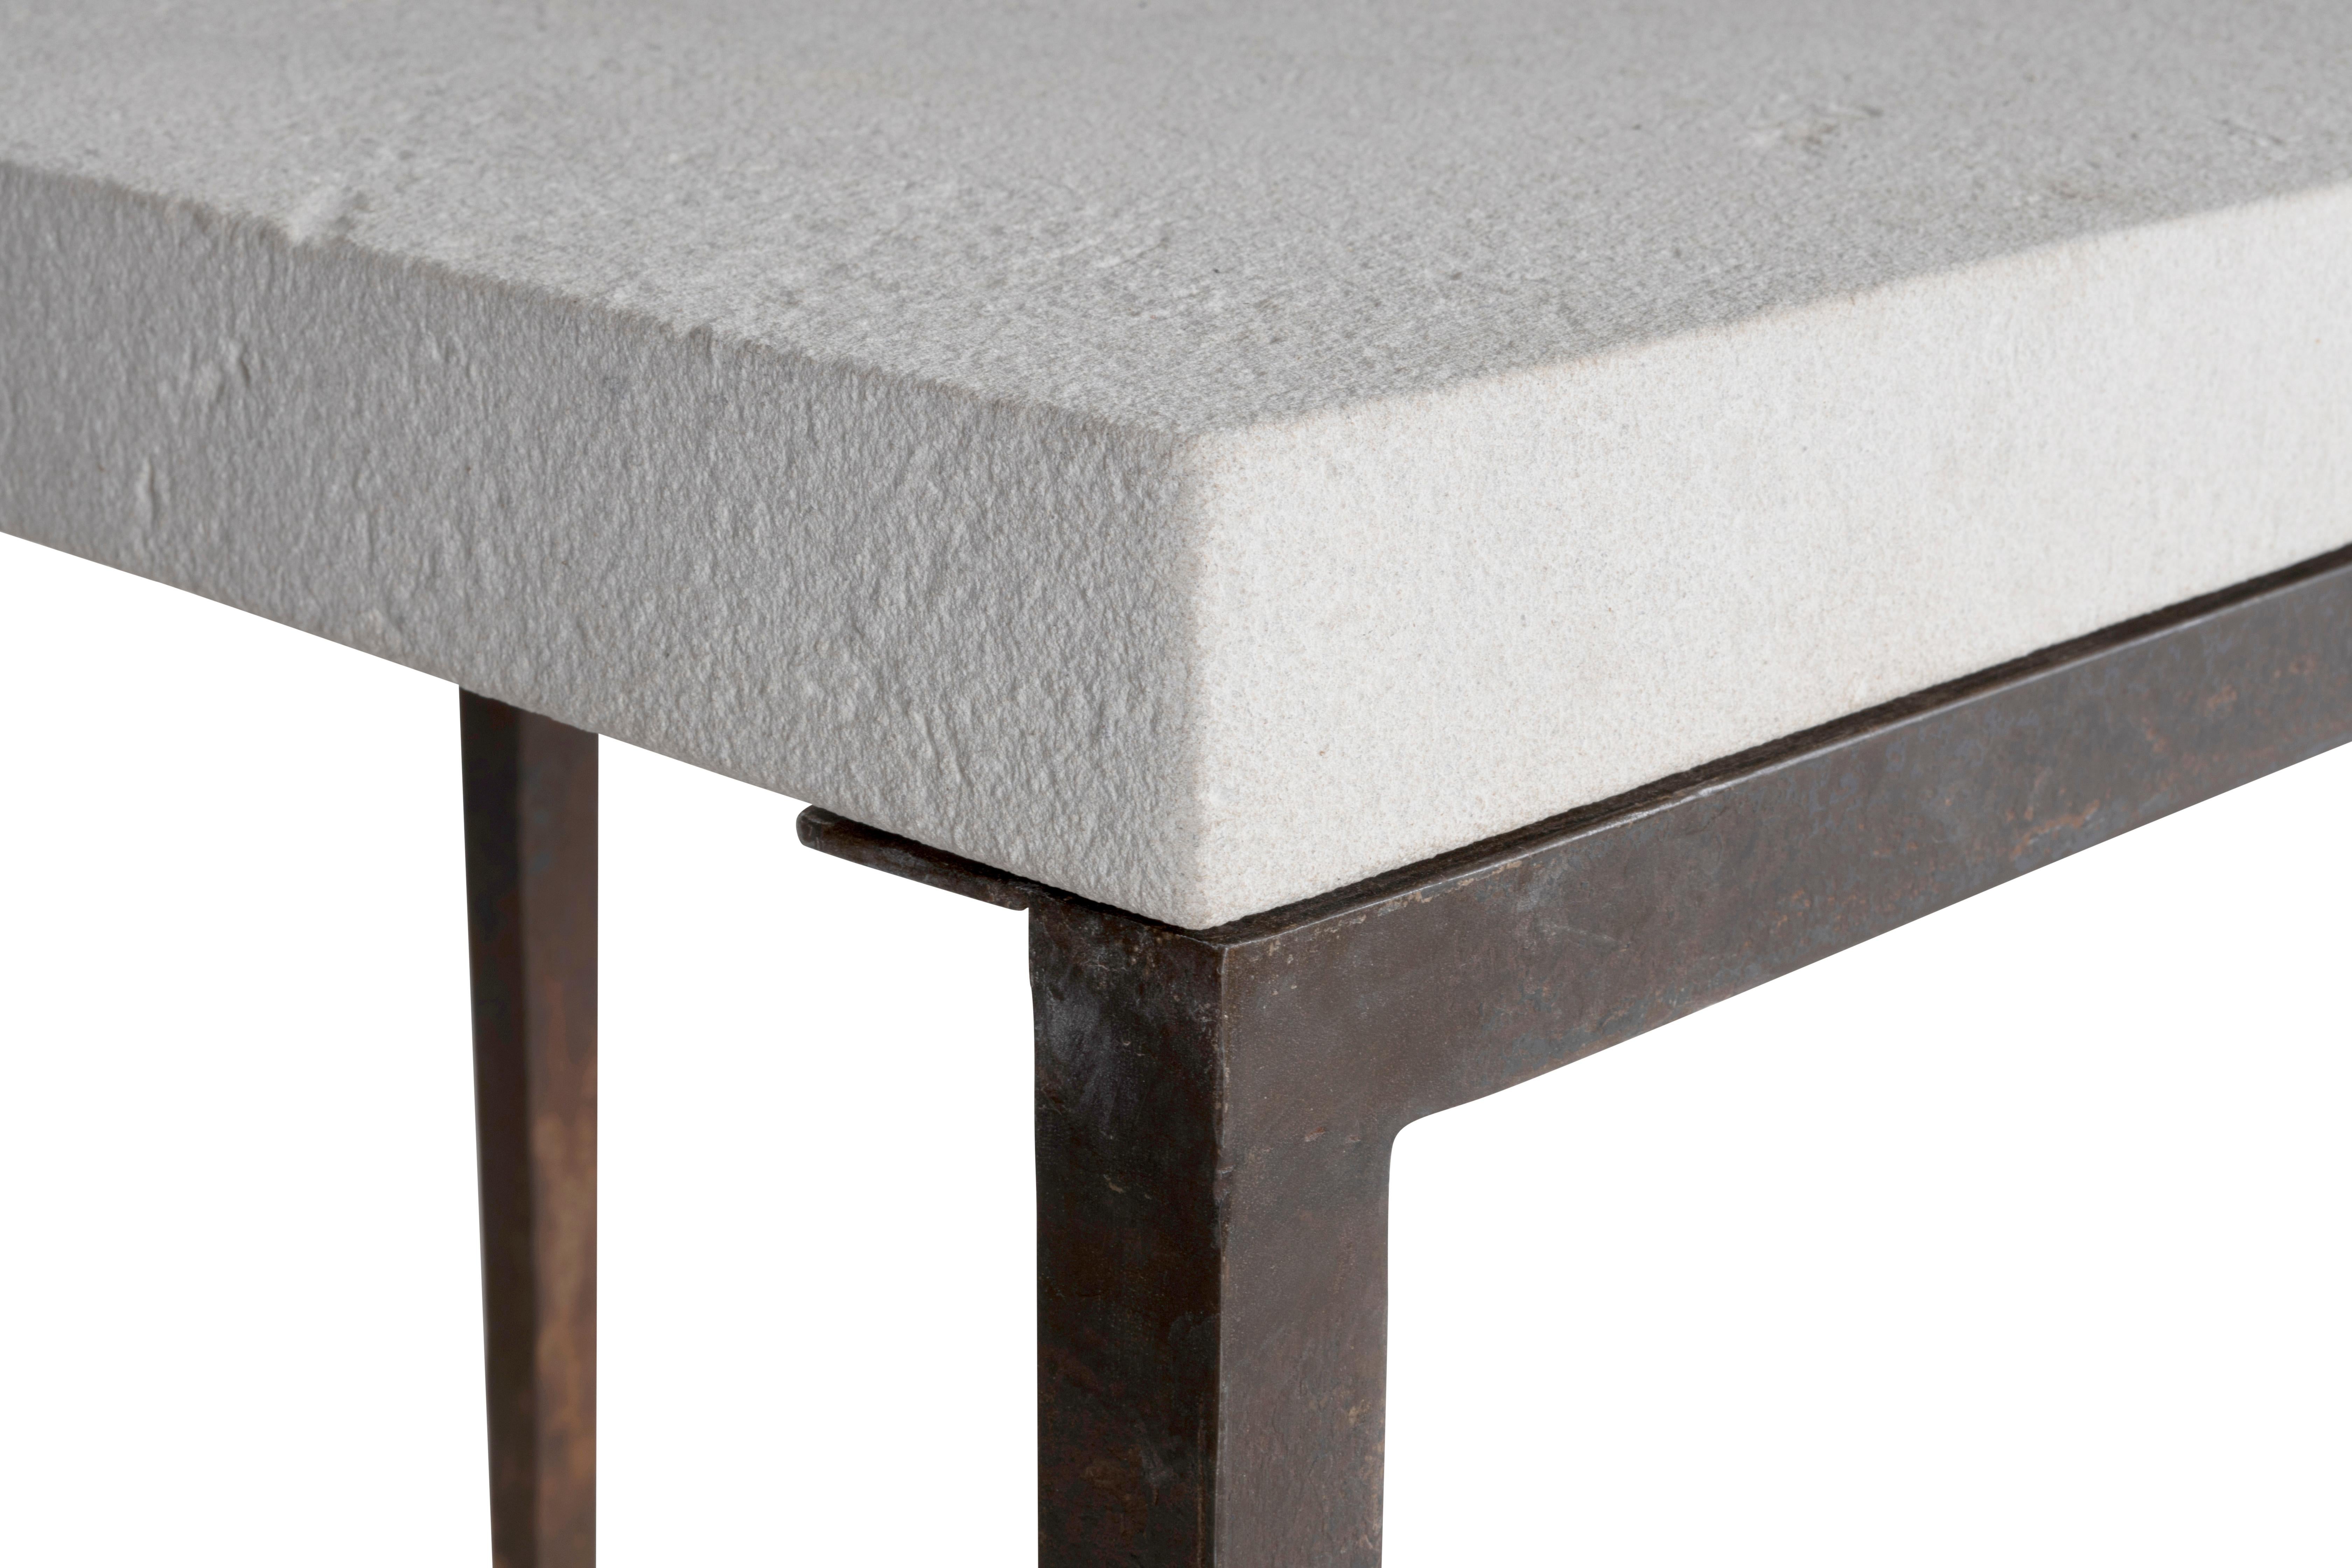 20th Century Side Table with Cast Iron Tapered Legs and Limestone Top